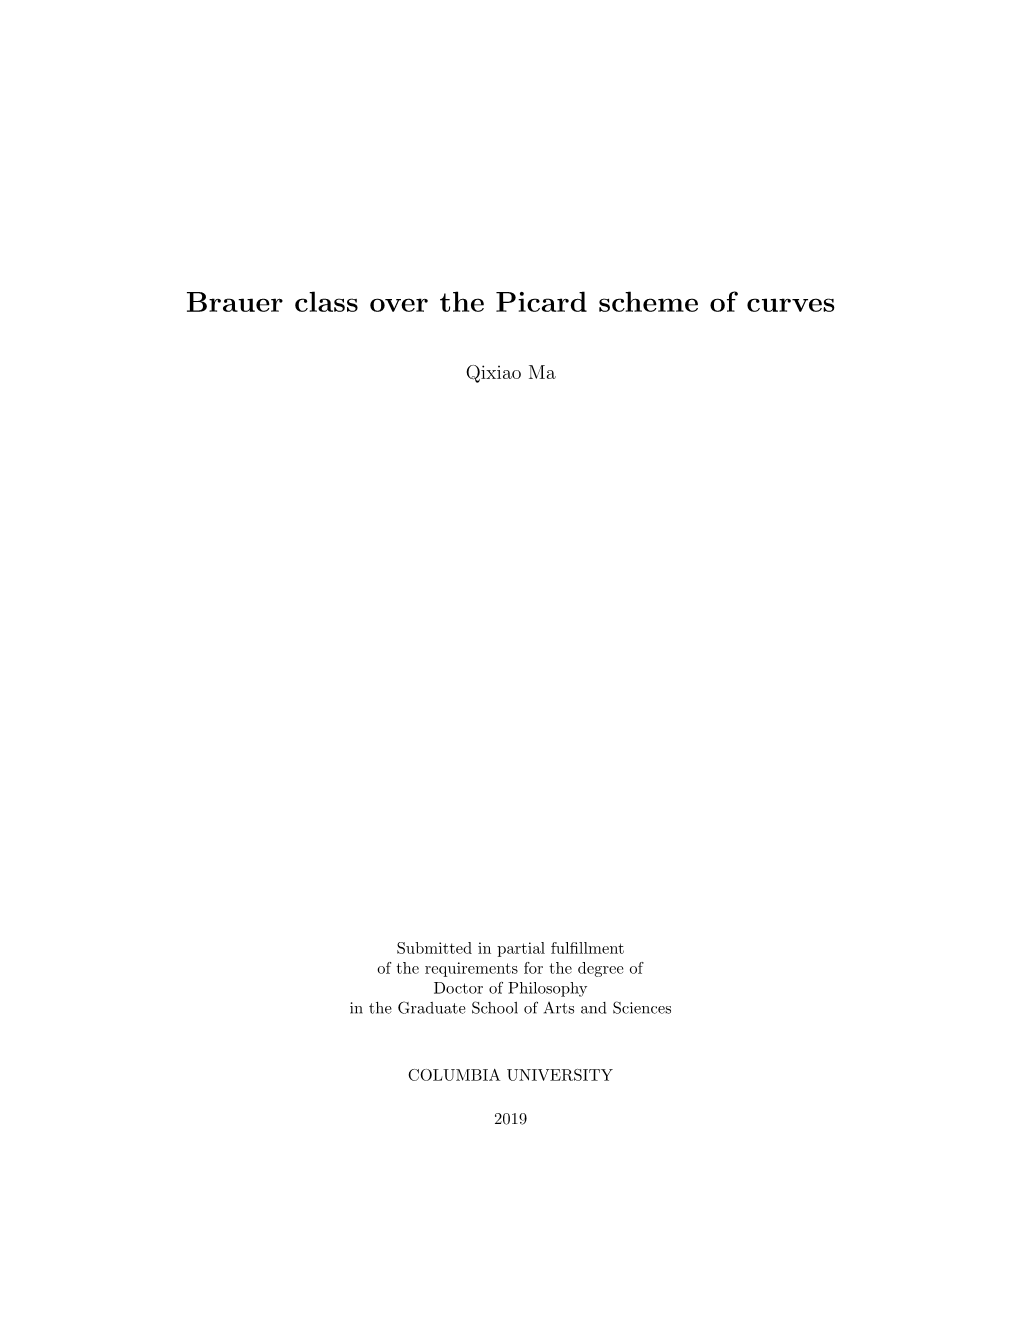 Brauer Class Over the Picard Scheme of Curves